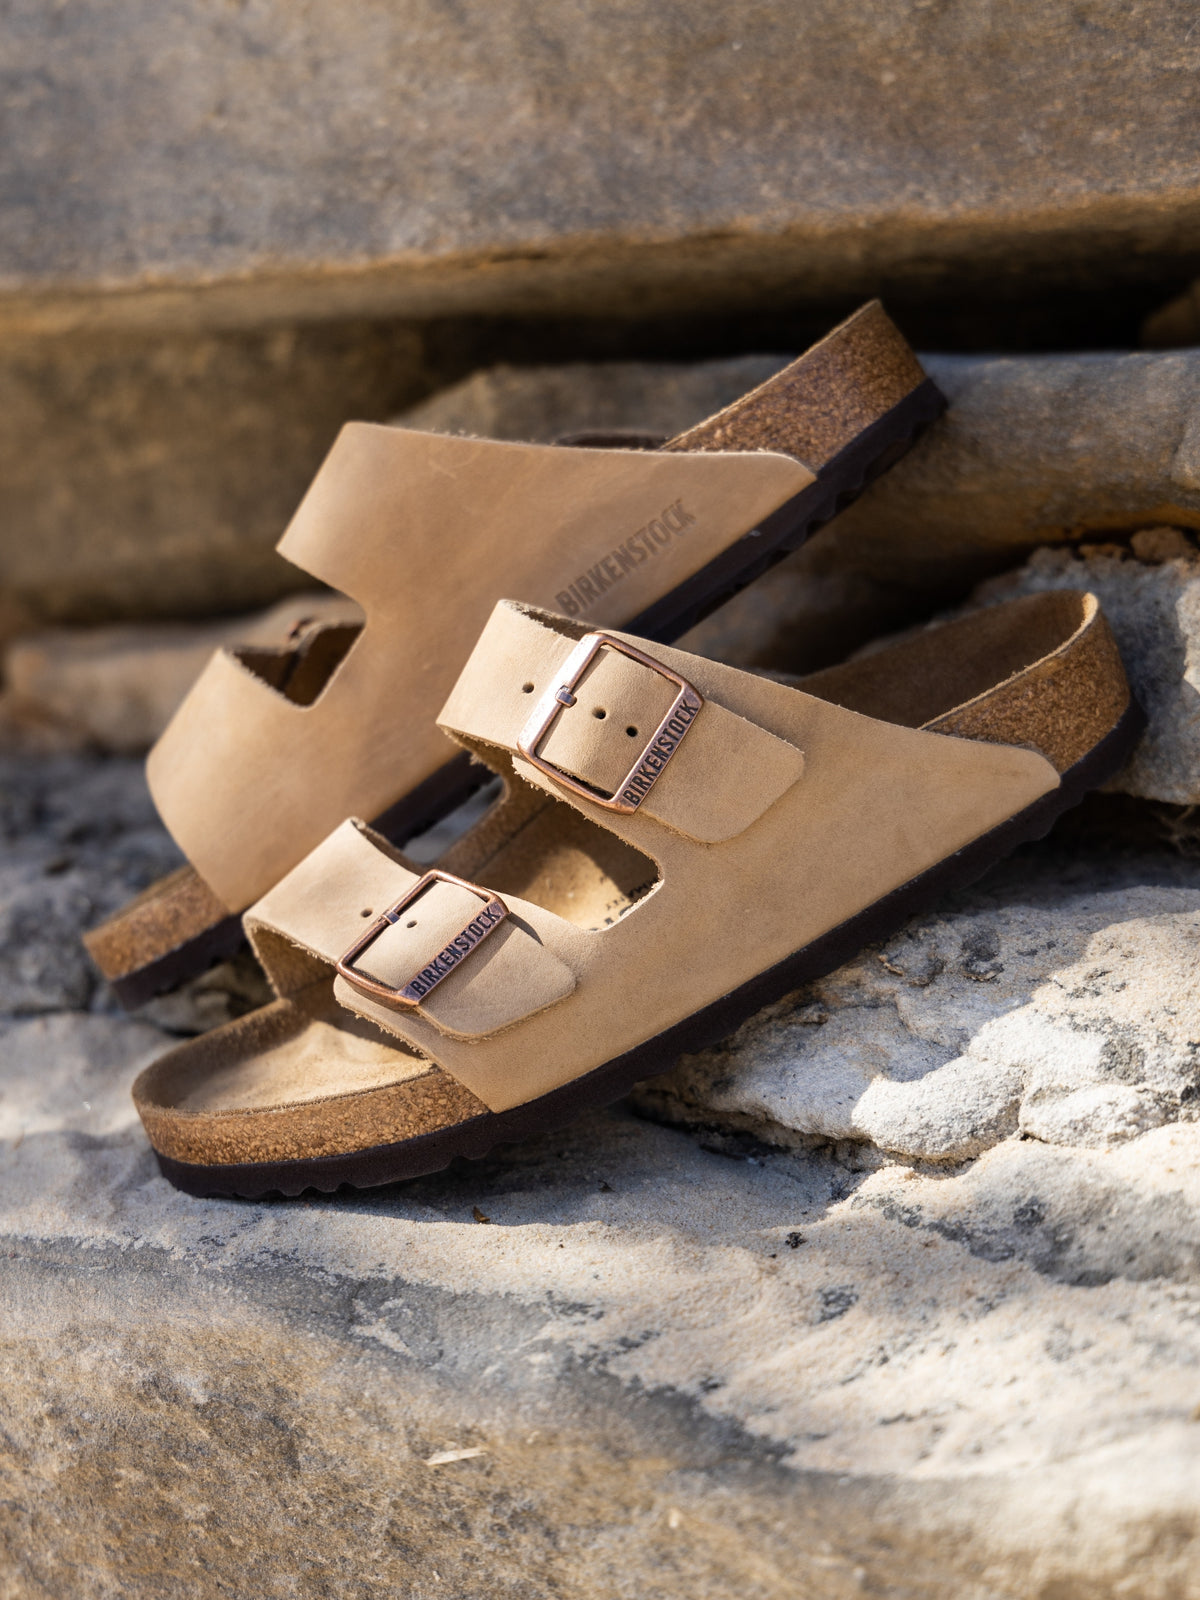 Unisex Arizona Two-Strap Regular Width Sandals in Tobacco Brown Leather